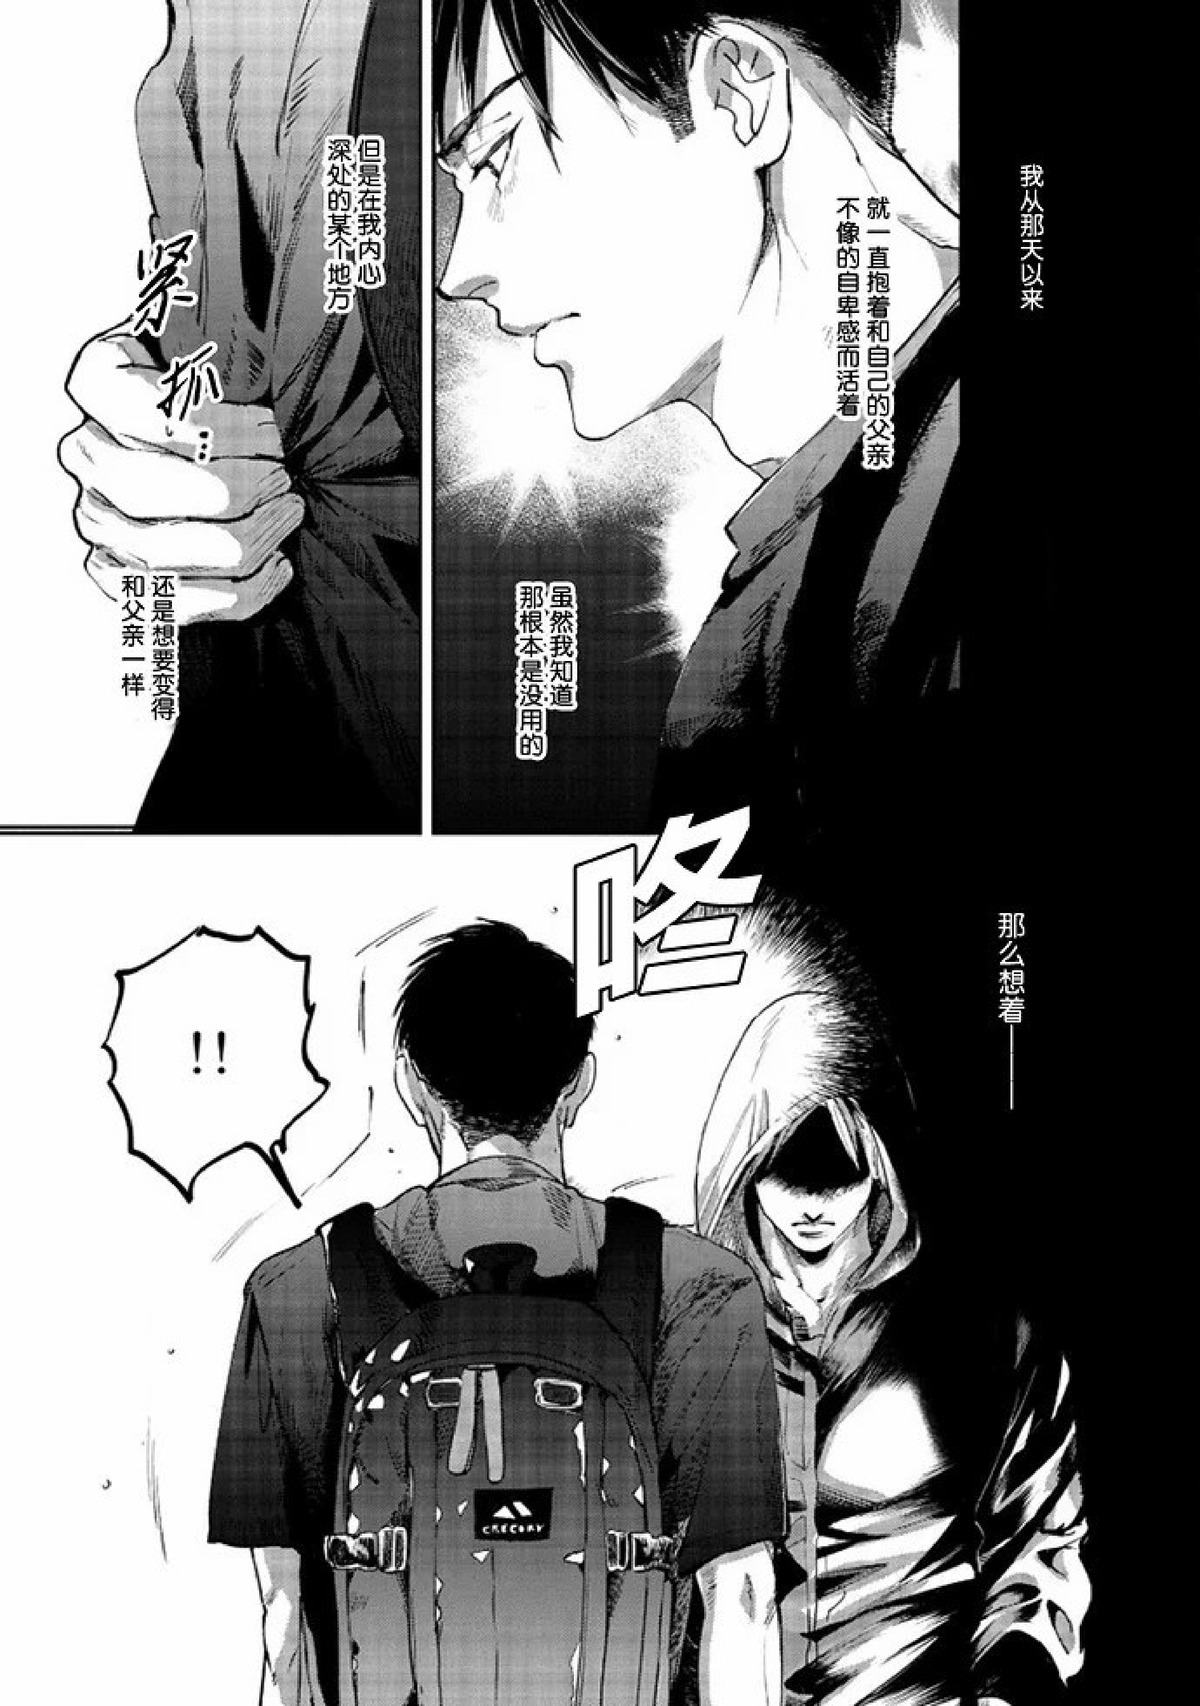 【Two sides of the same coin[腐漫]】漫画-（上卷01-02）章节漫画下拉式图片-33.jpg